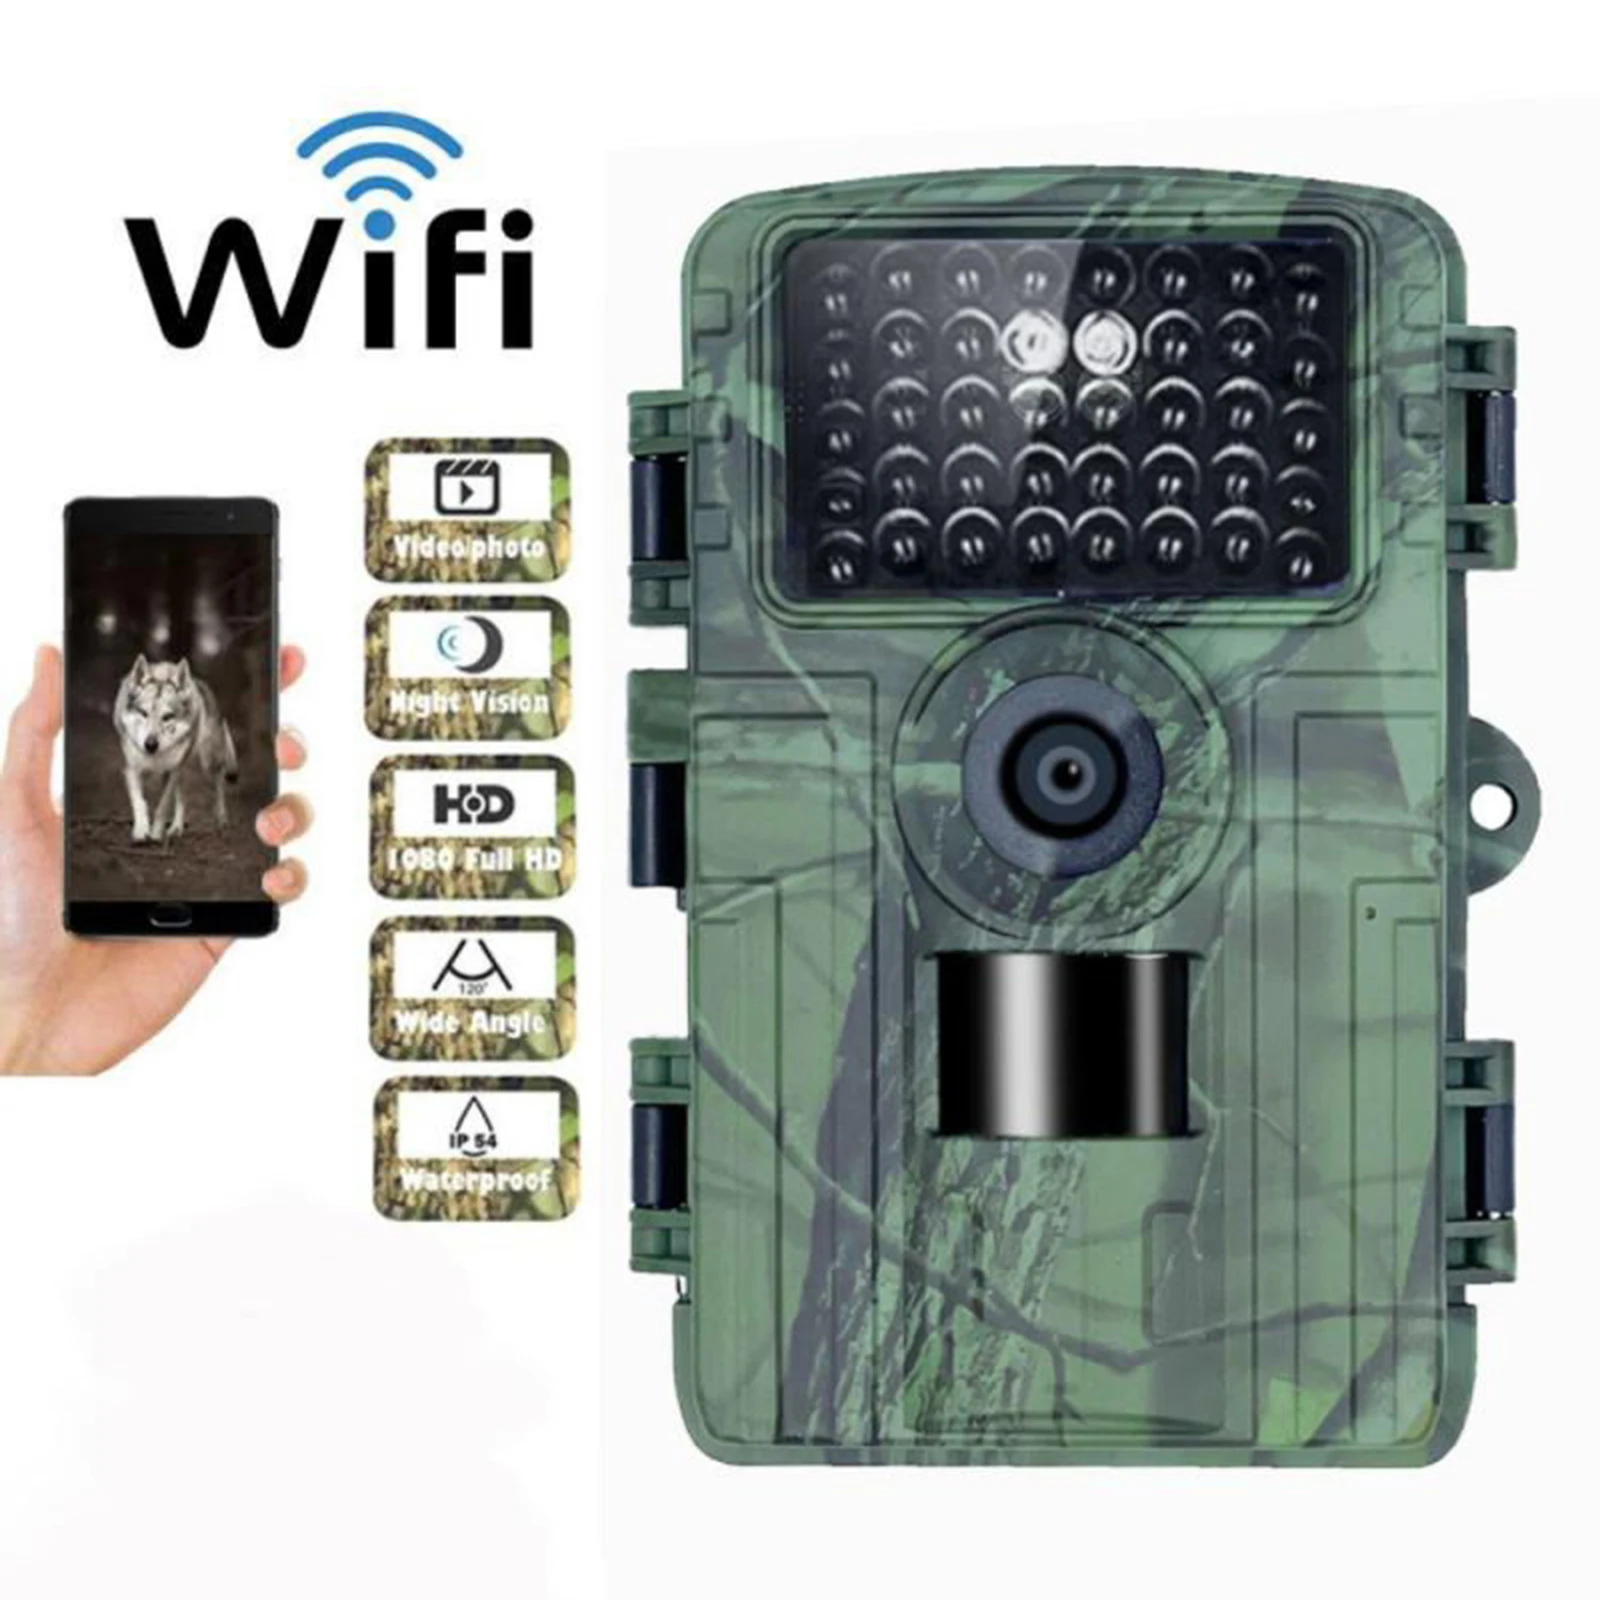 

Camera Hunting Camera Photo-traps Professional Trail Useful Water Resistant Hunting Camera IP66 Wi-Fi Widely Used Wildlife 1080P